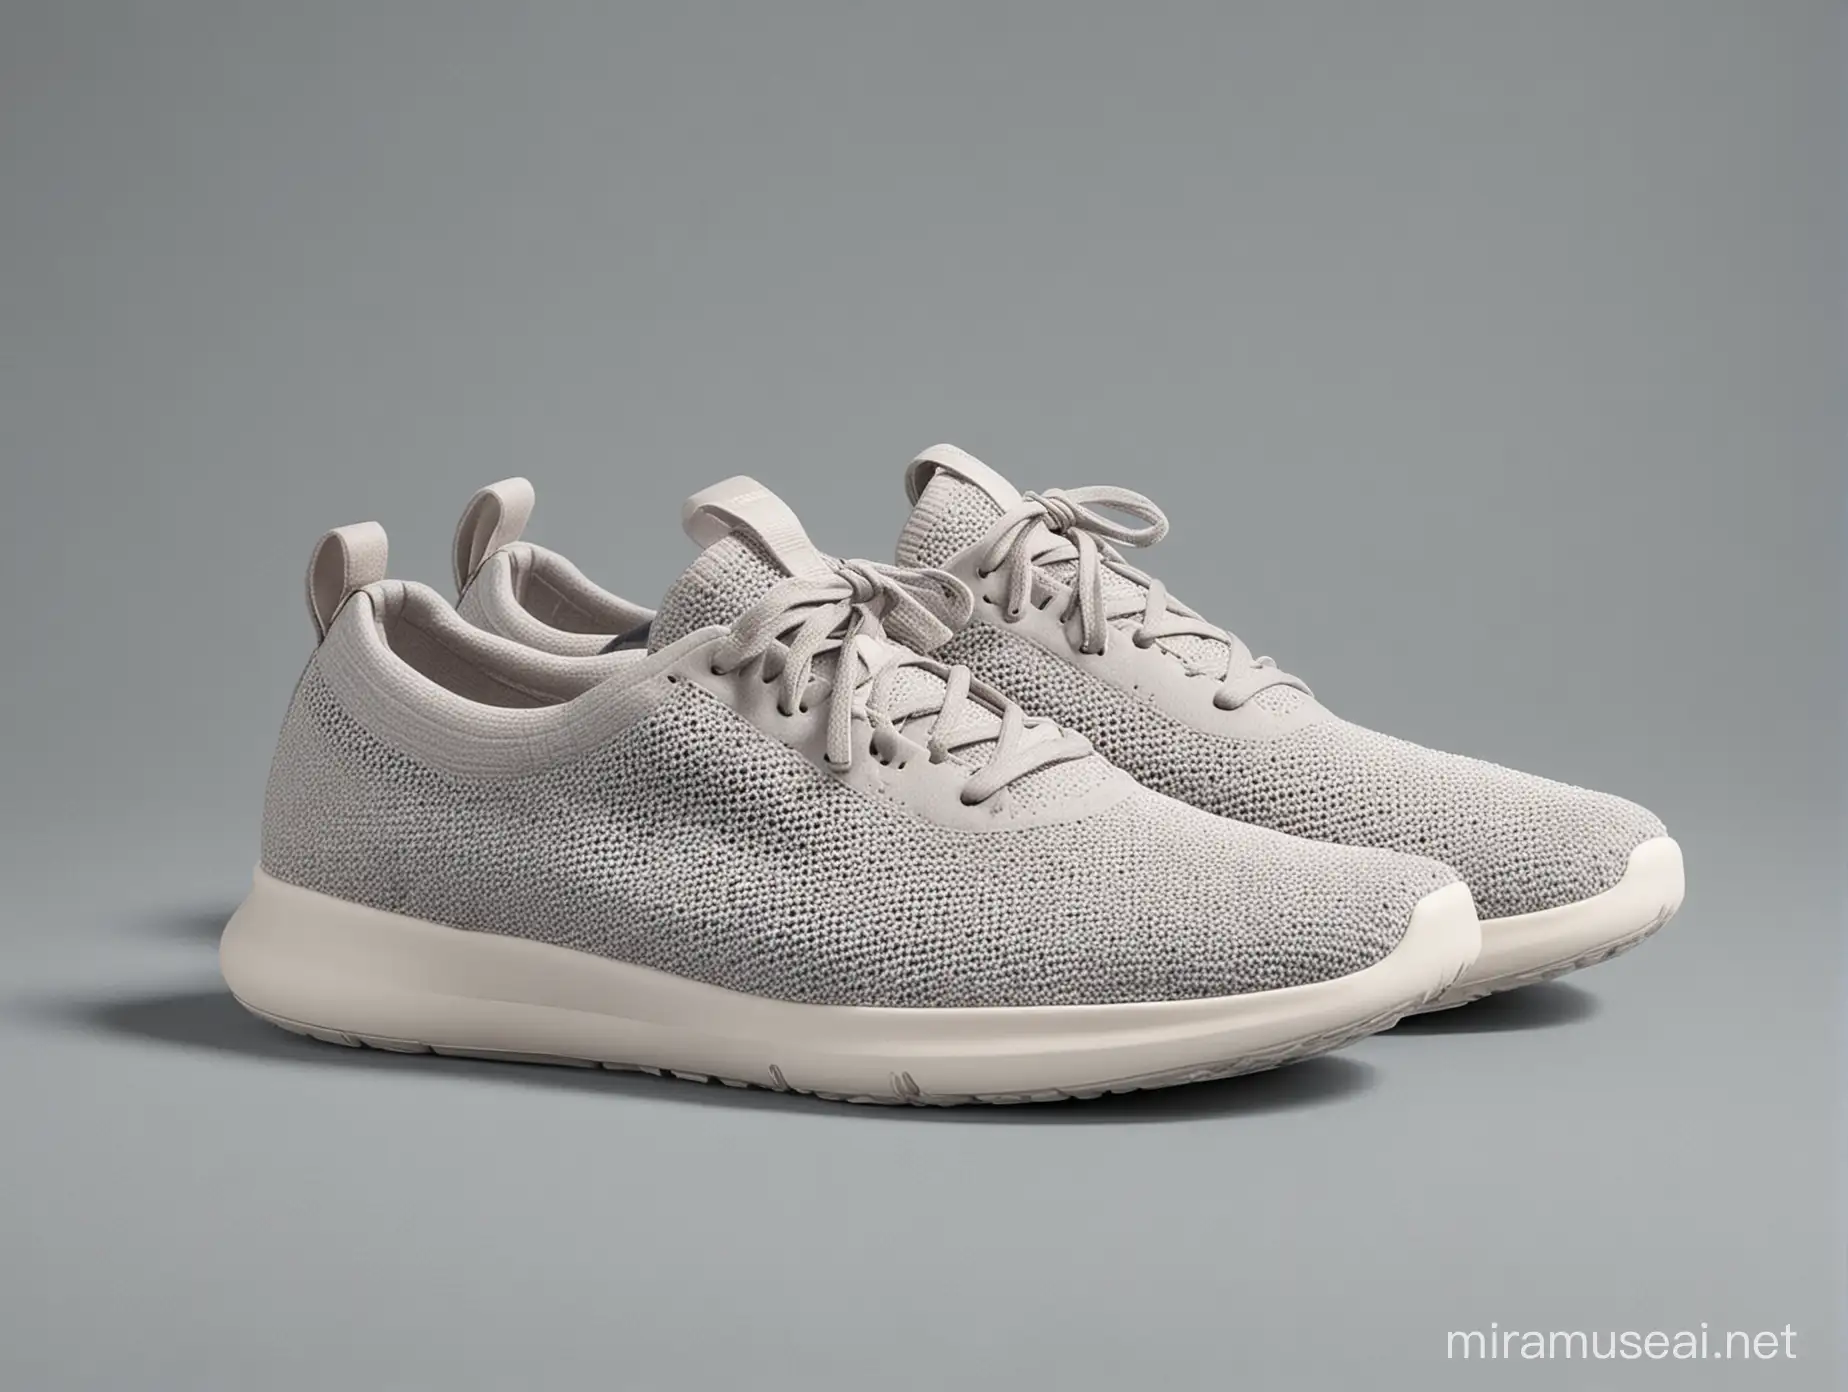 Allbirds Running Shoes and the background is light grey